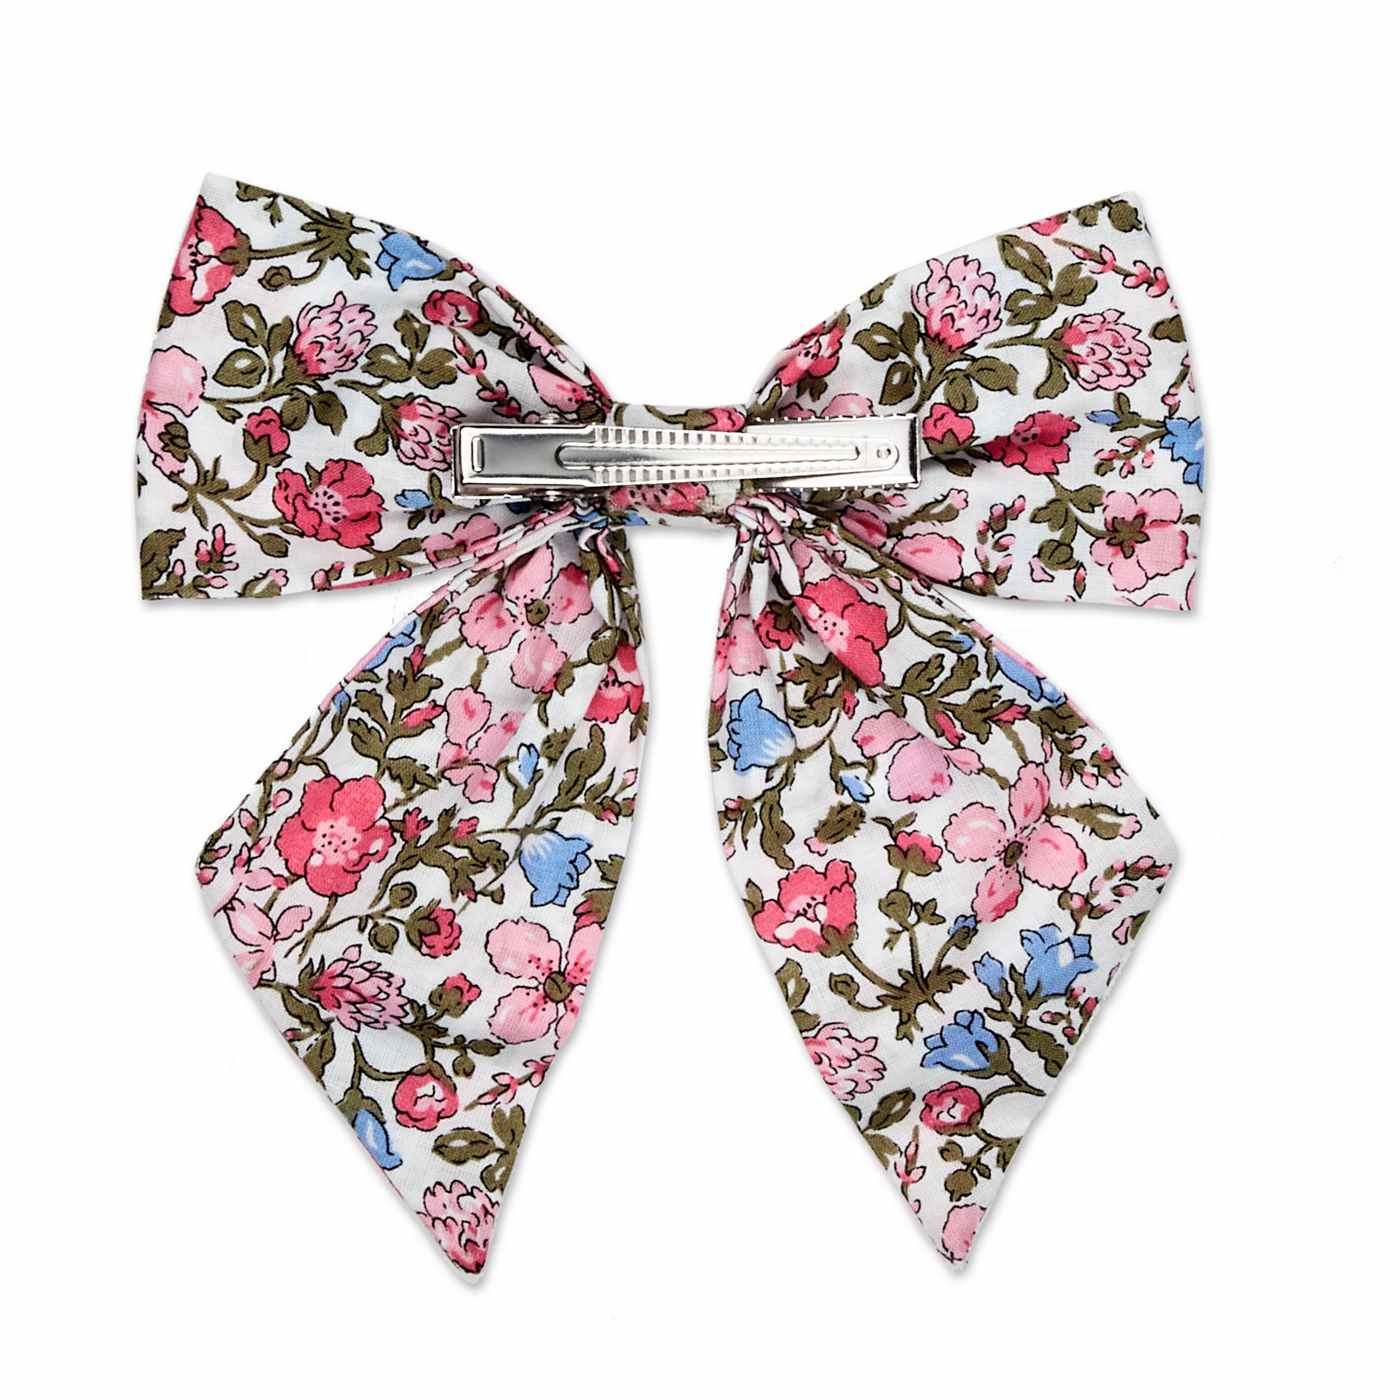 Scunci Bow Barrette Pink Floral; image 2 of 3